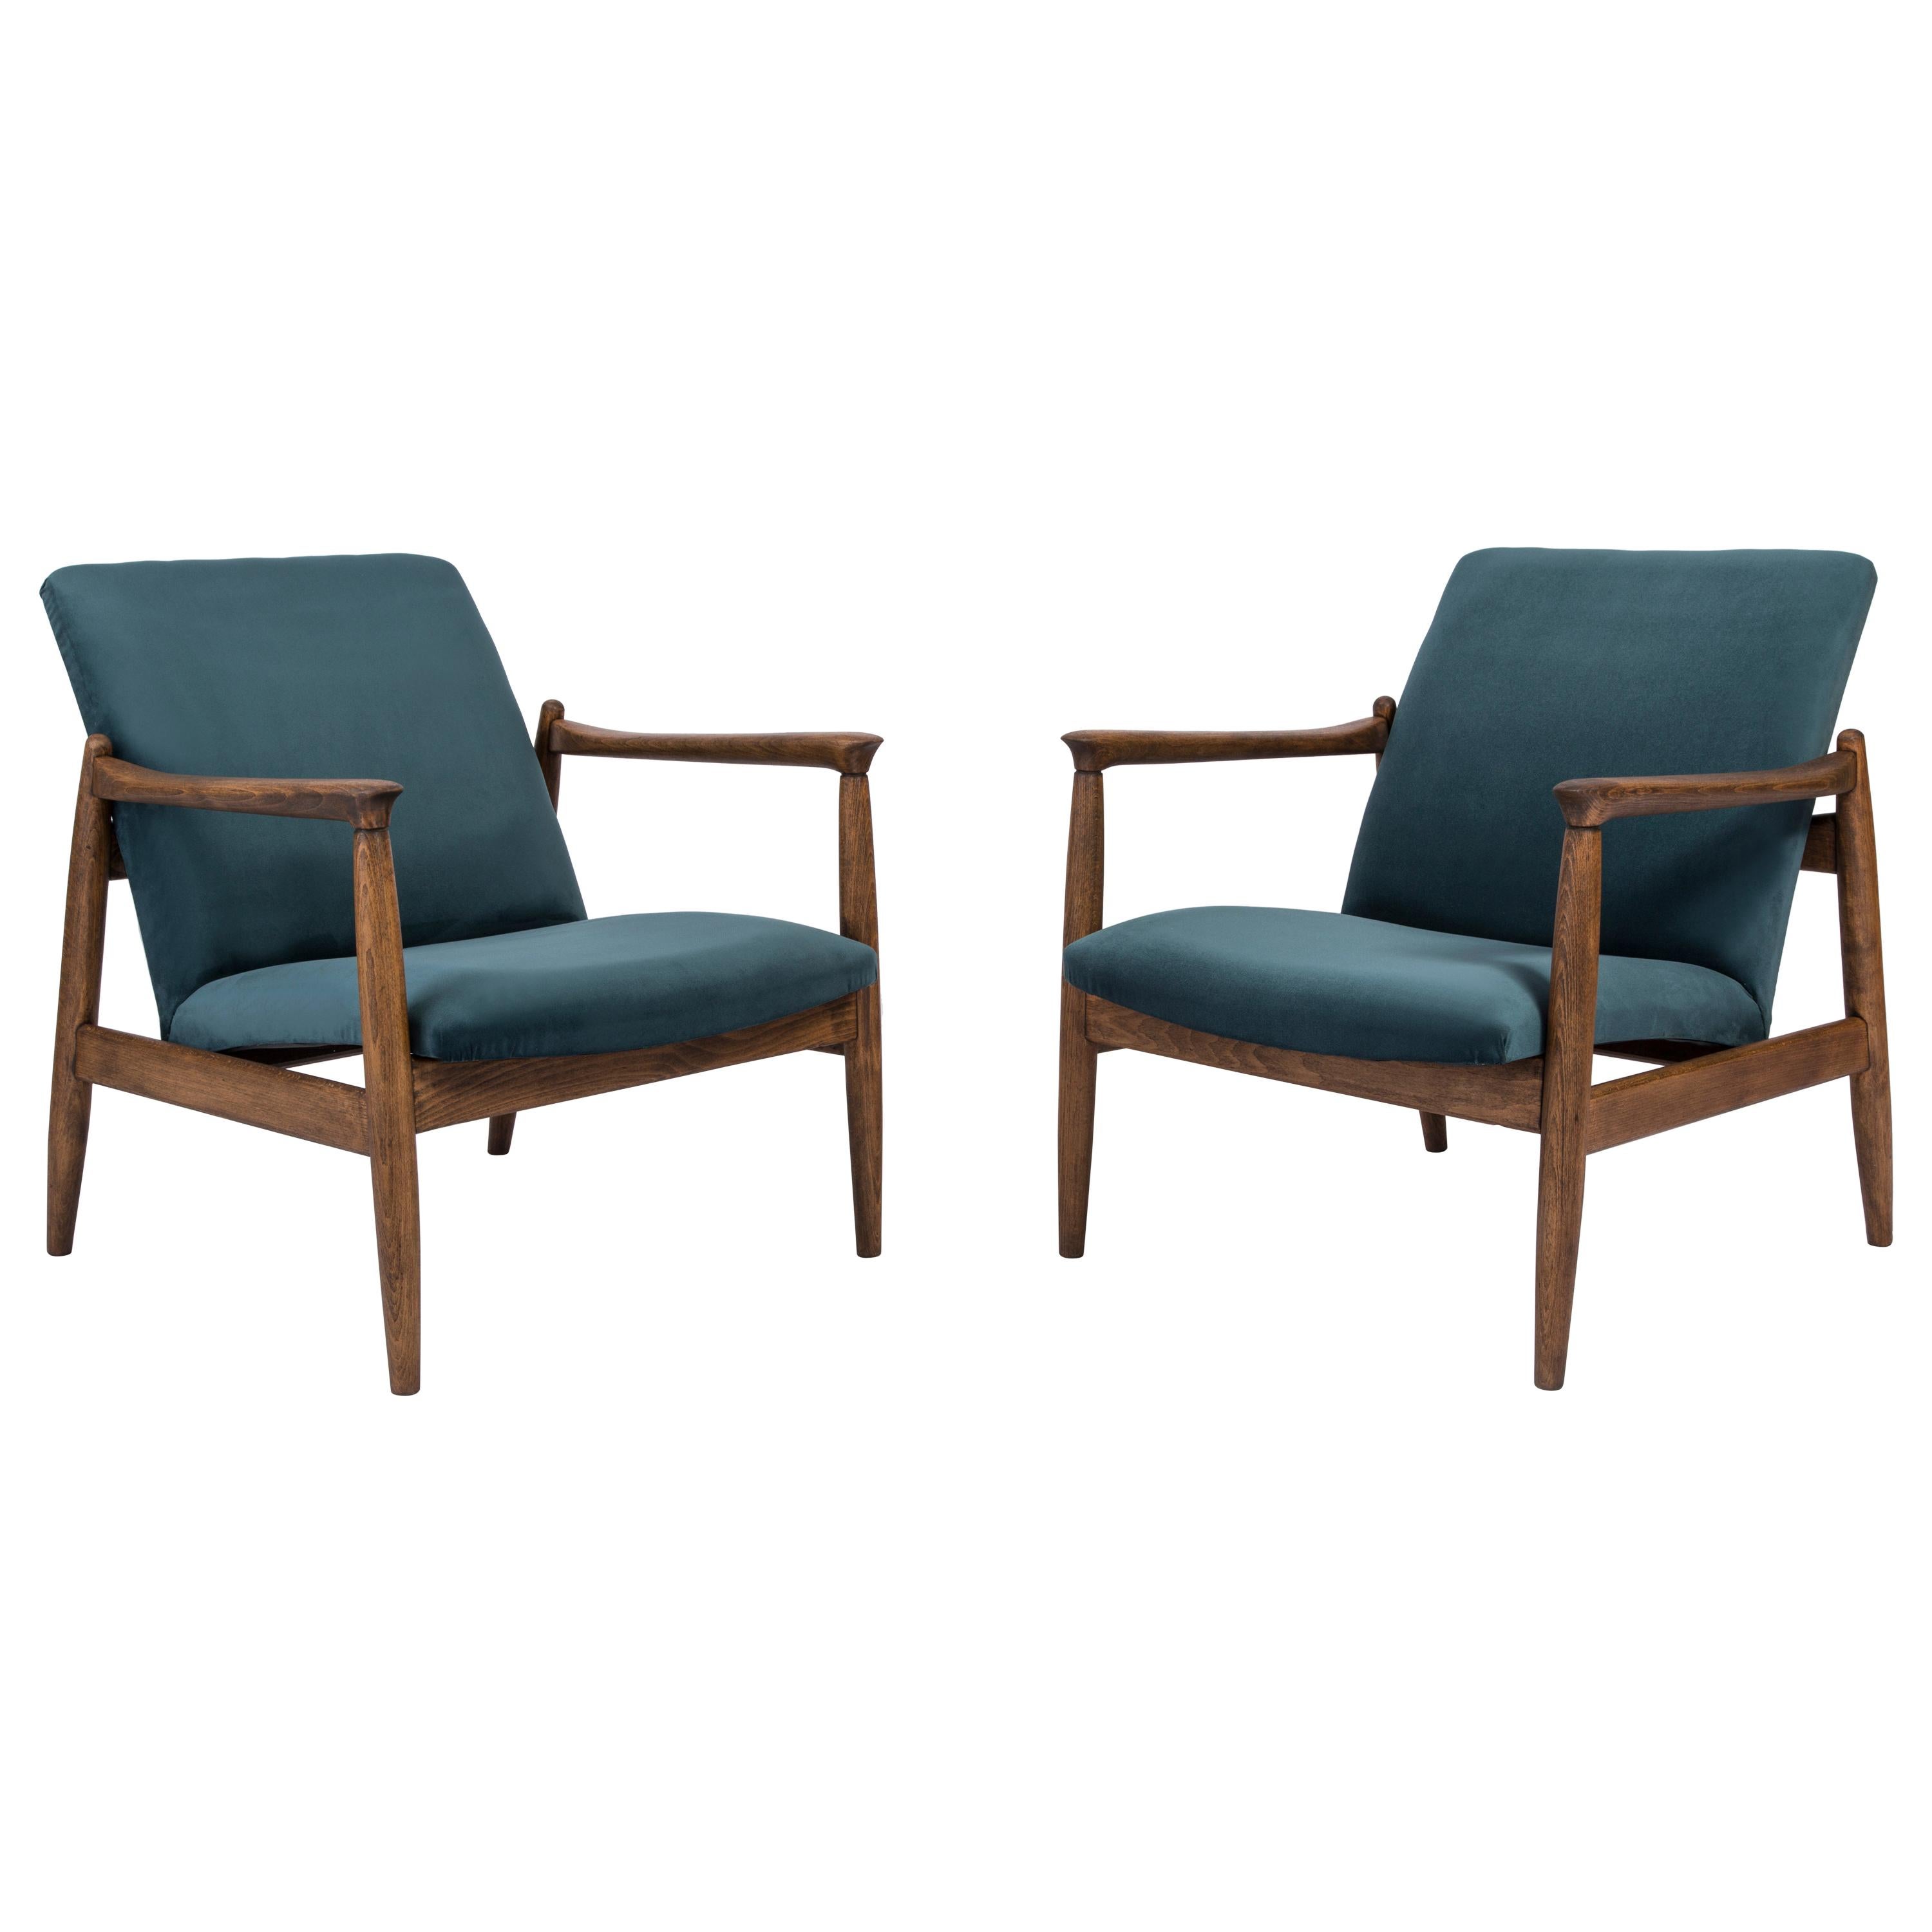 Pair of Petrol Blue Armchairs, Edmund Homa, 1960s For Sale